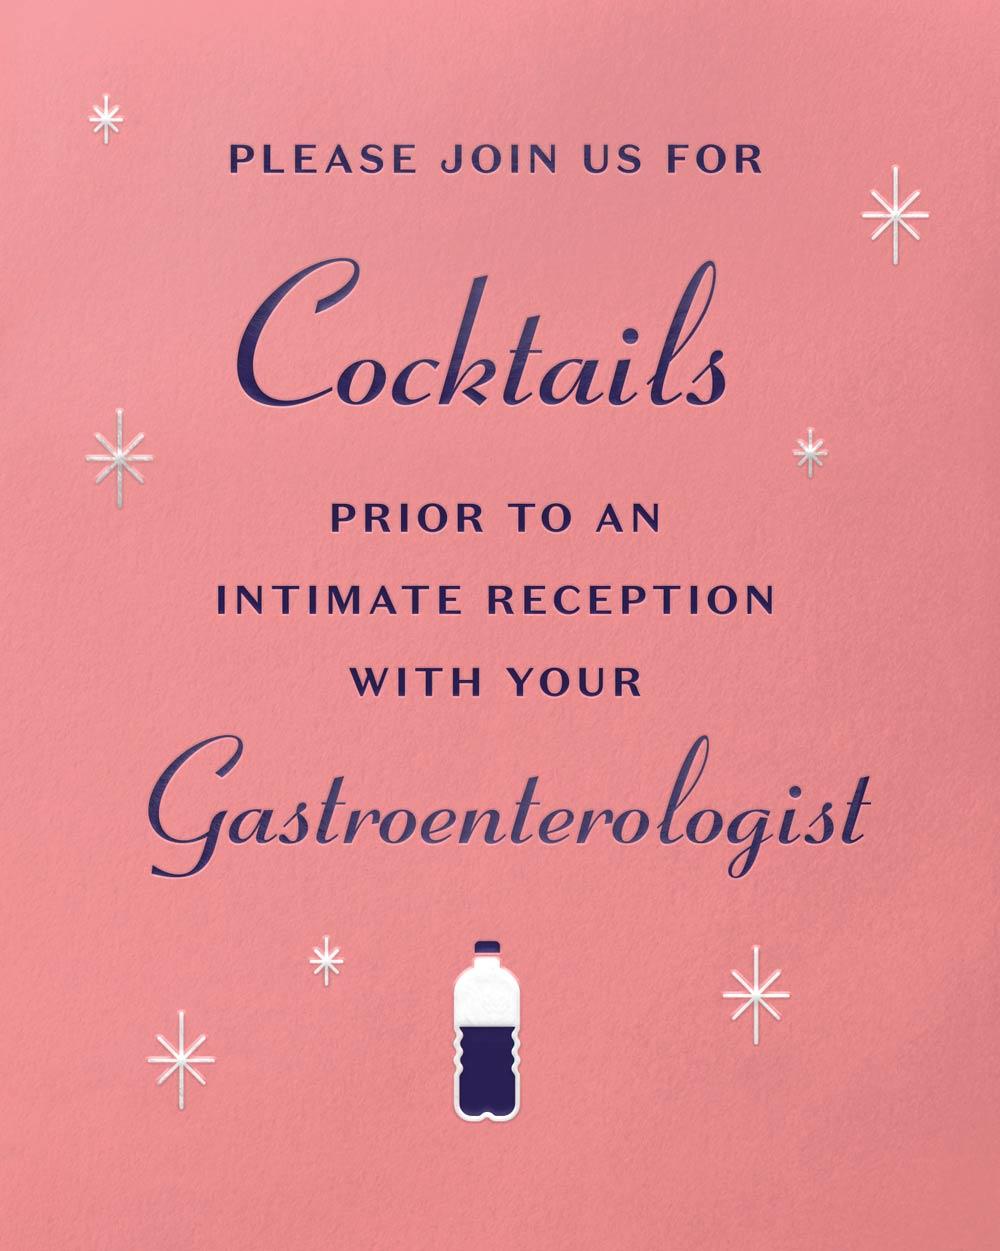 Please join us for cocktails prior to an intimate reception with your gastroenterologist.